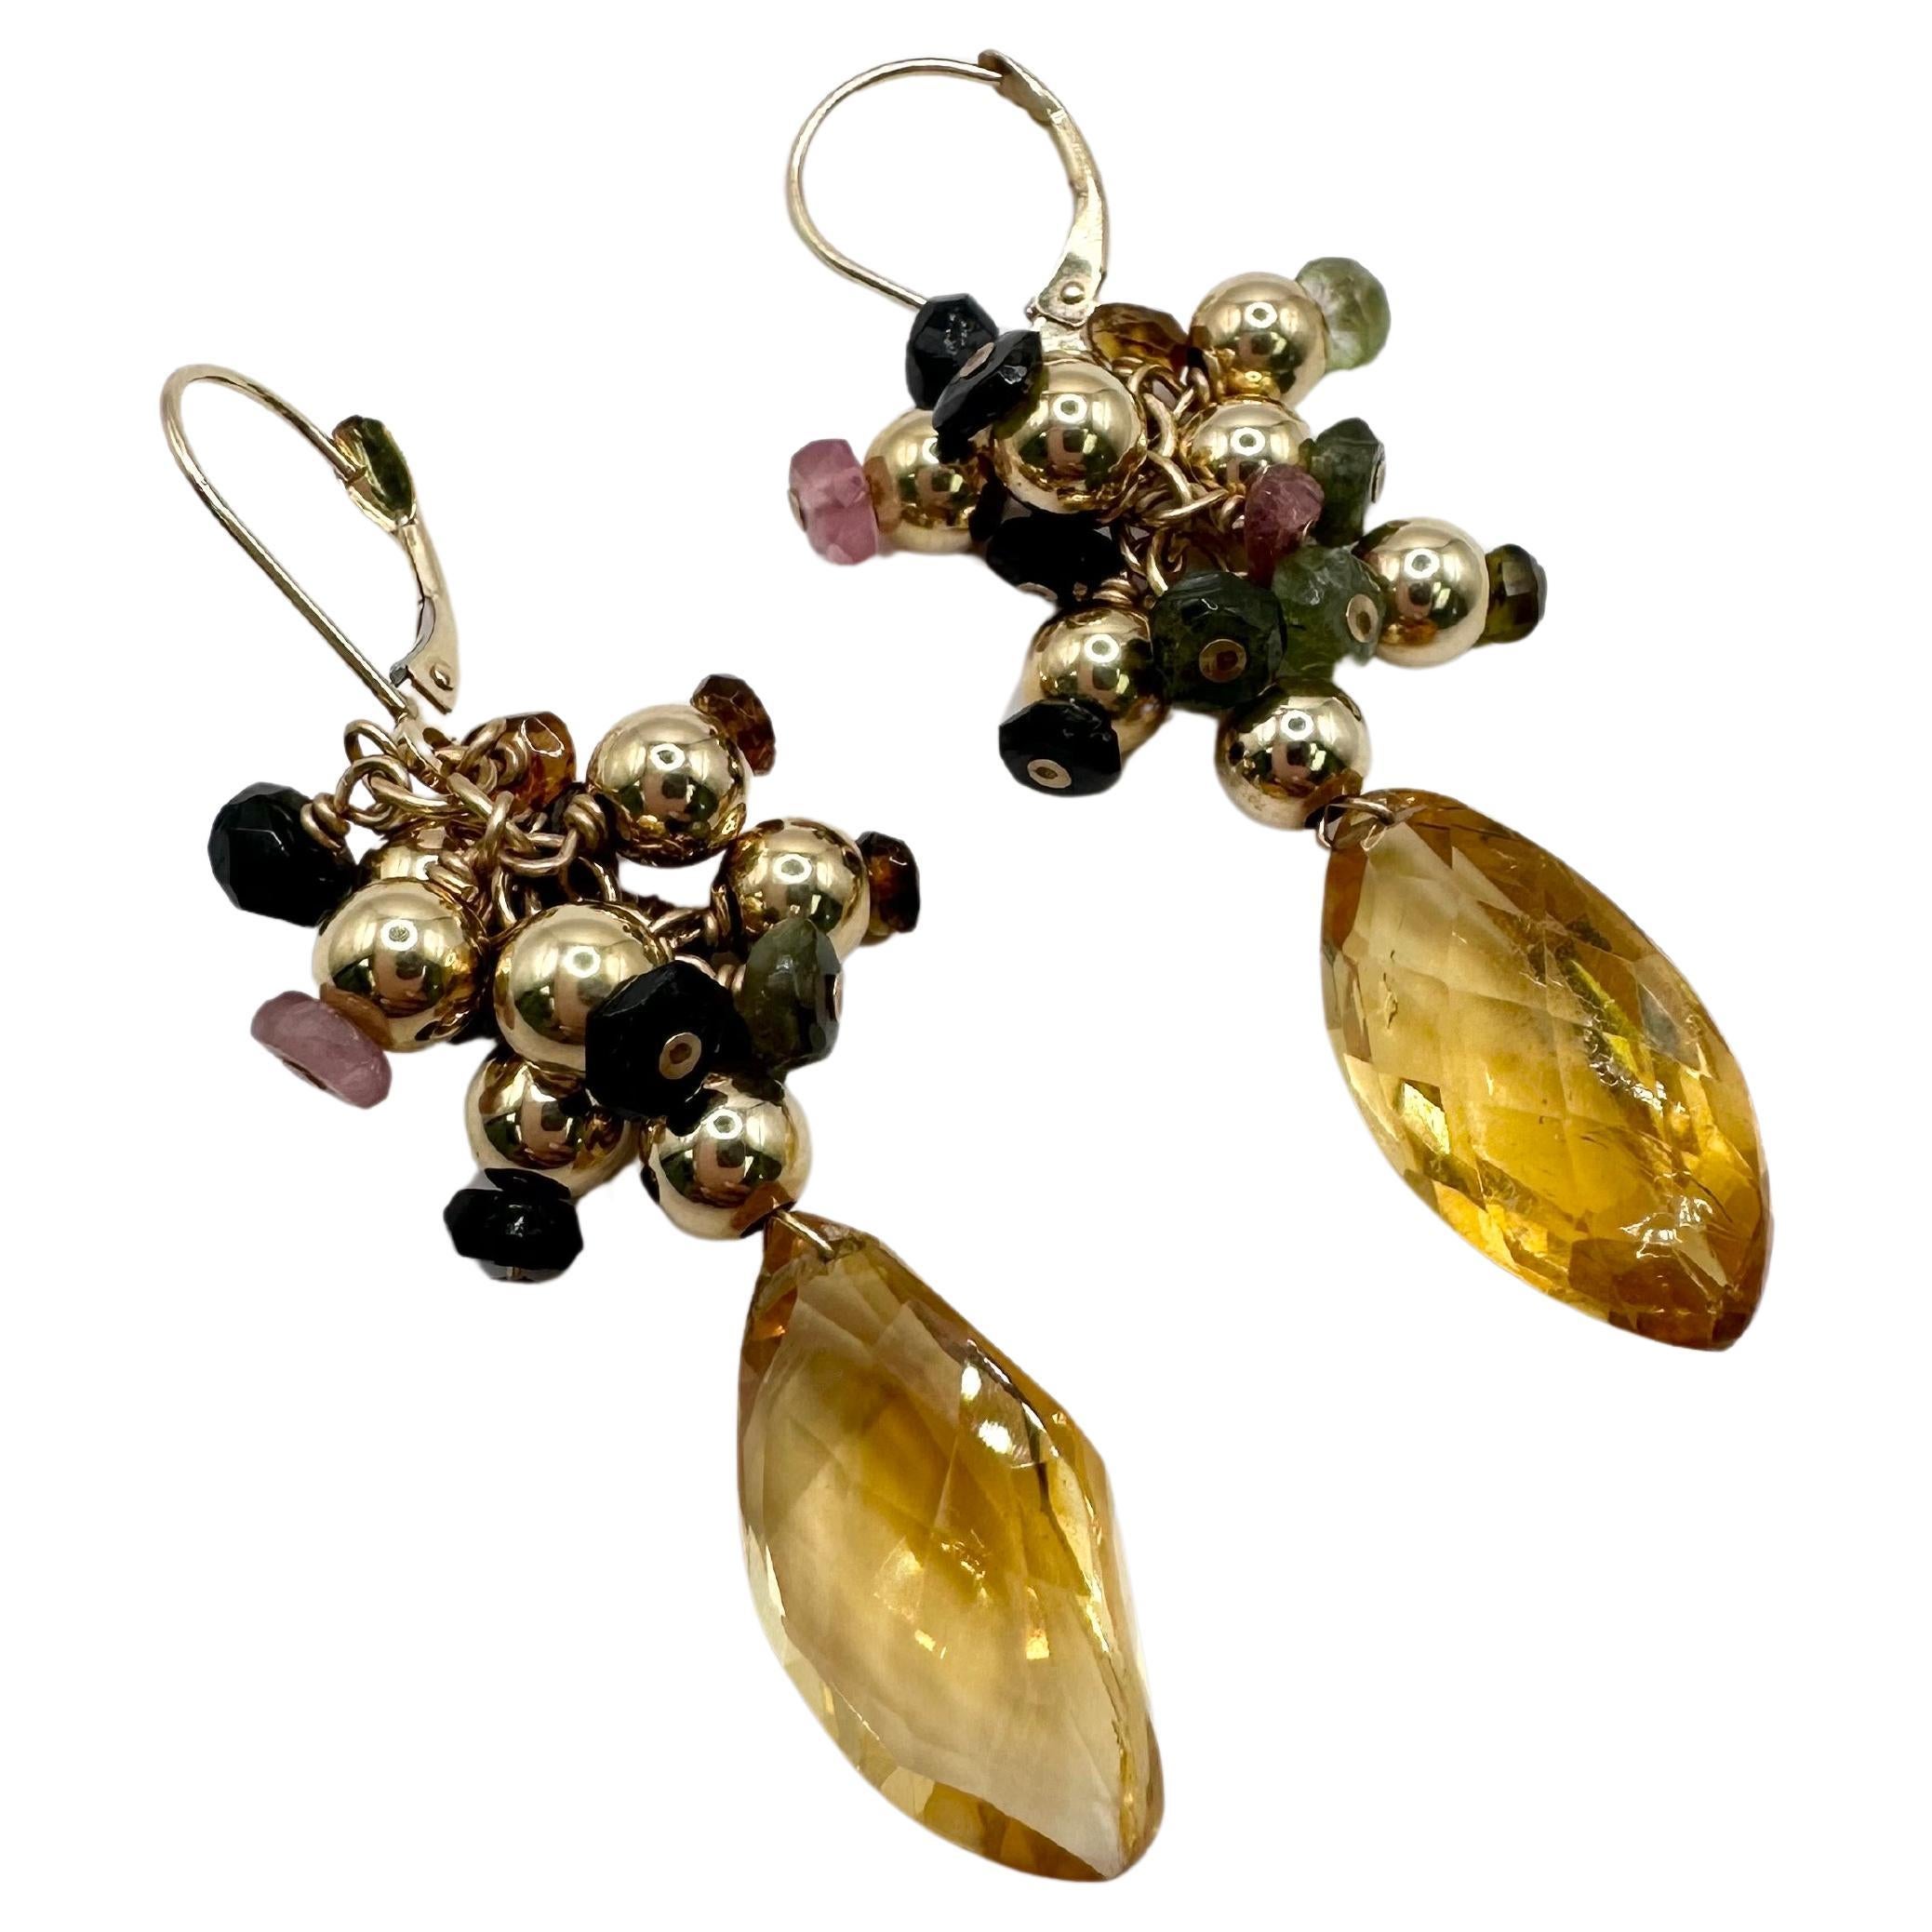 Citrine dagling earrings with natural gems 14KT gold